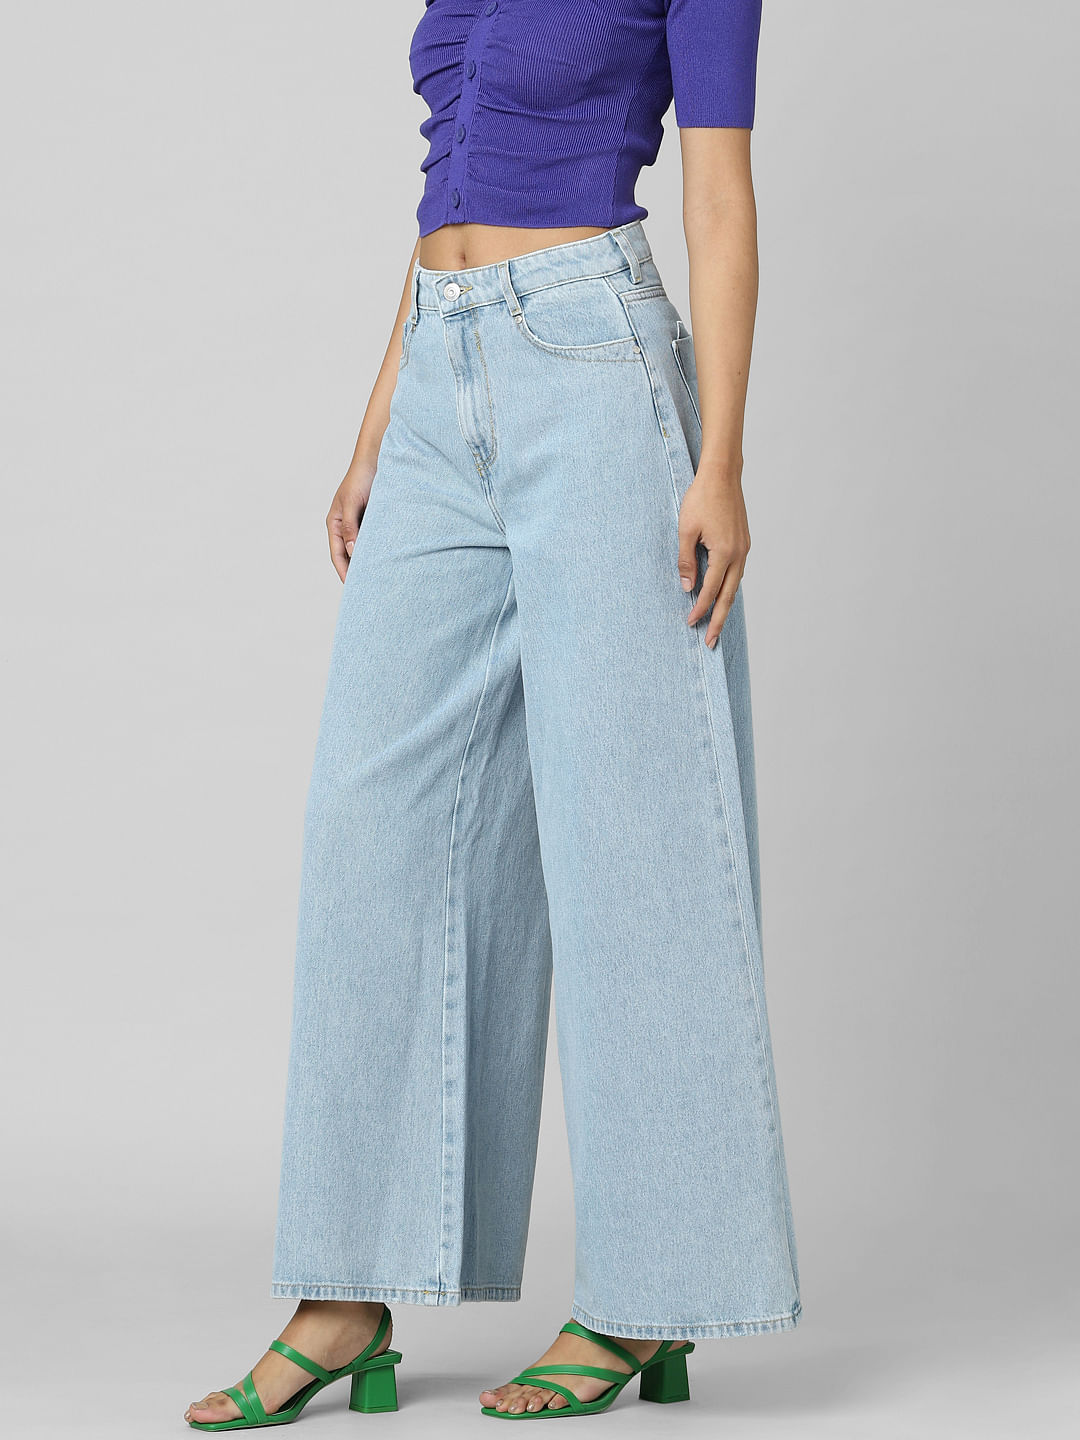 Freddy High Waist Pants and Jeans with Push-Up Effect | Freddy Official  Store